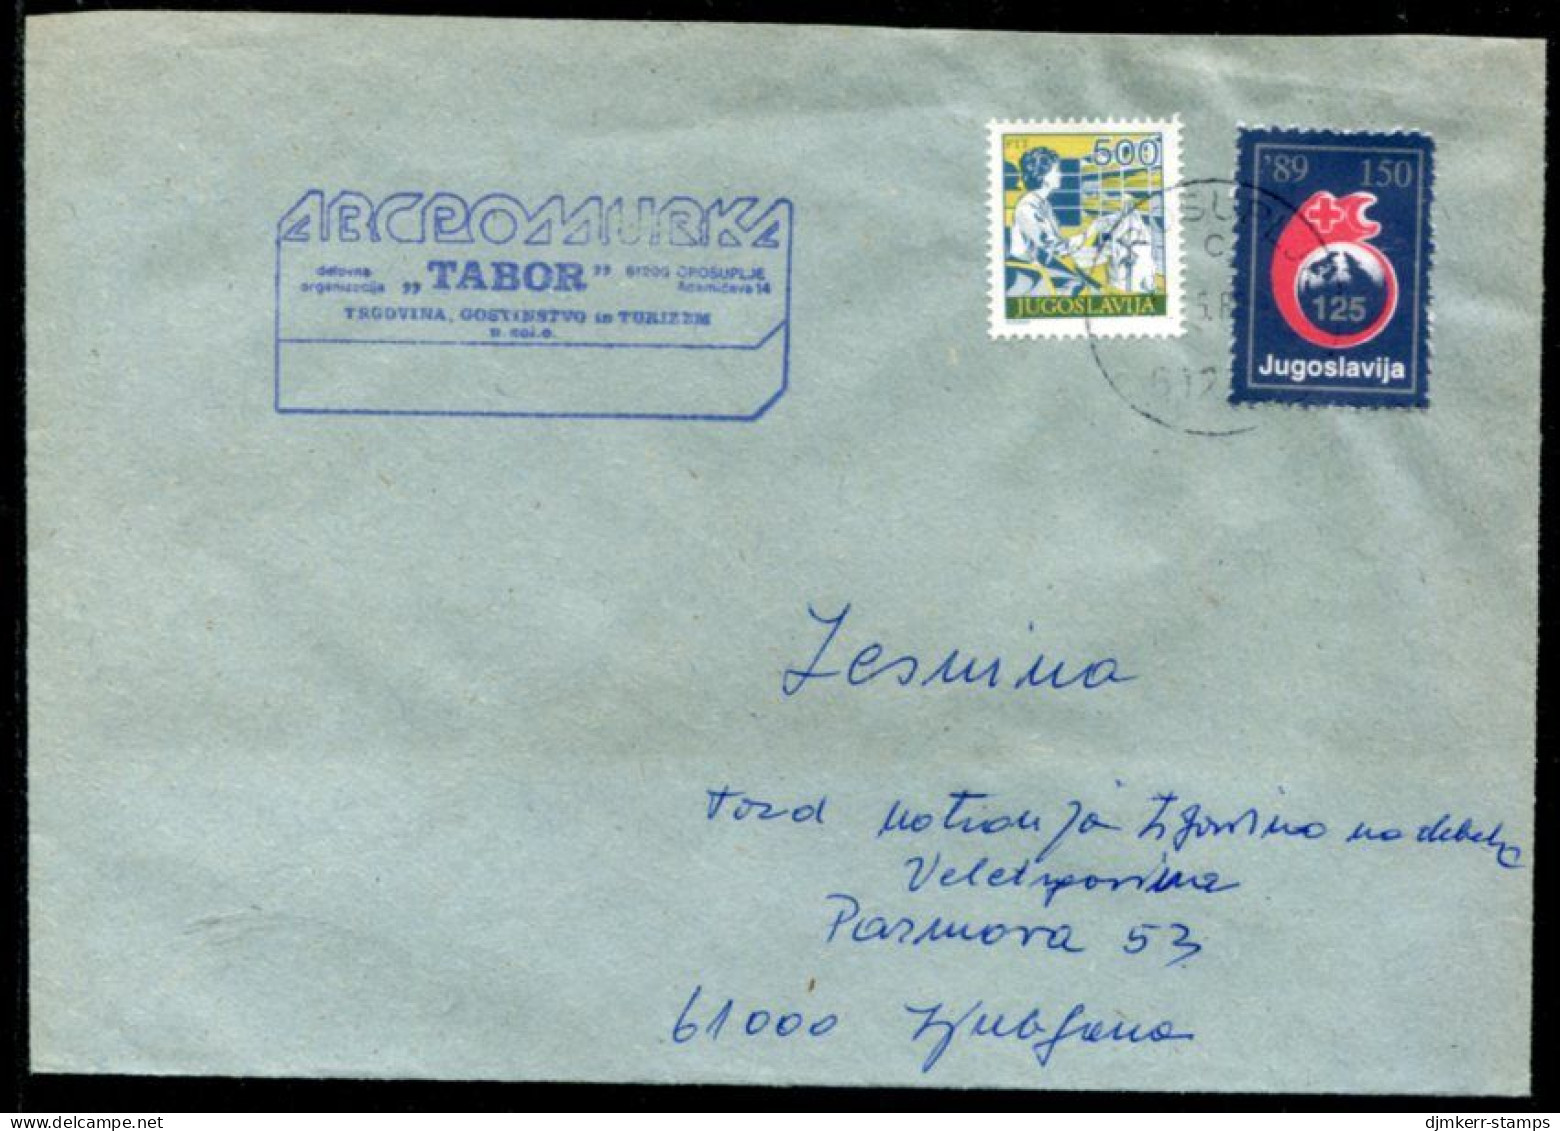 YUGOSLAVIA 1989 Commercial Cover With Red Cross Week 150 D Tax.  Michel ZZM 169 - Bienfaisance